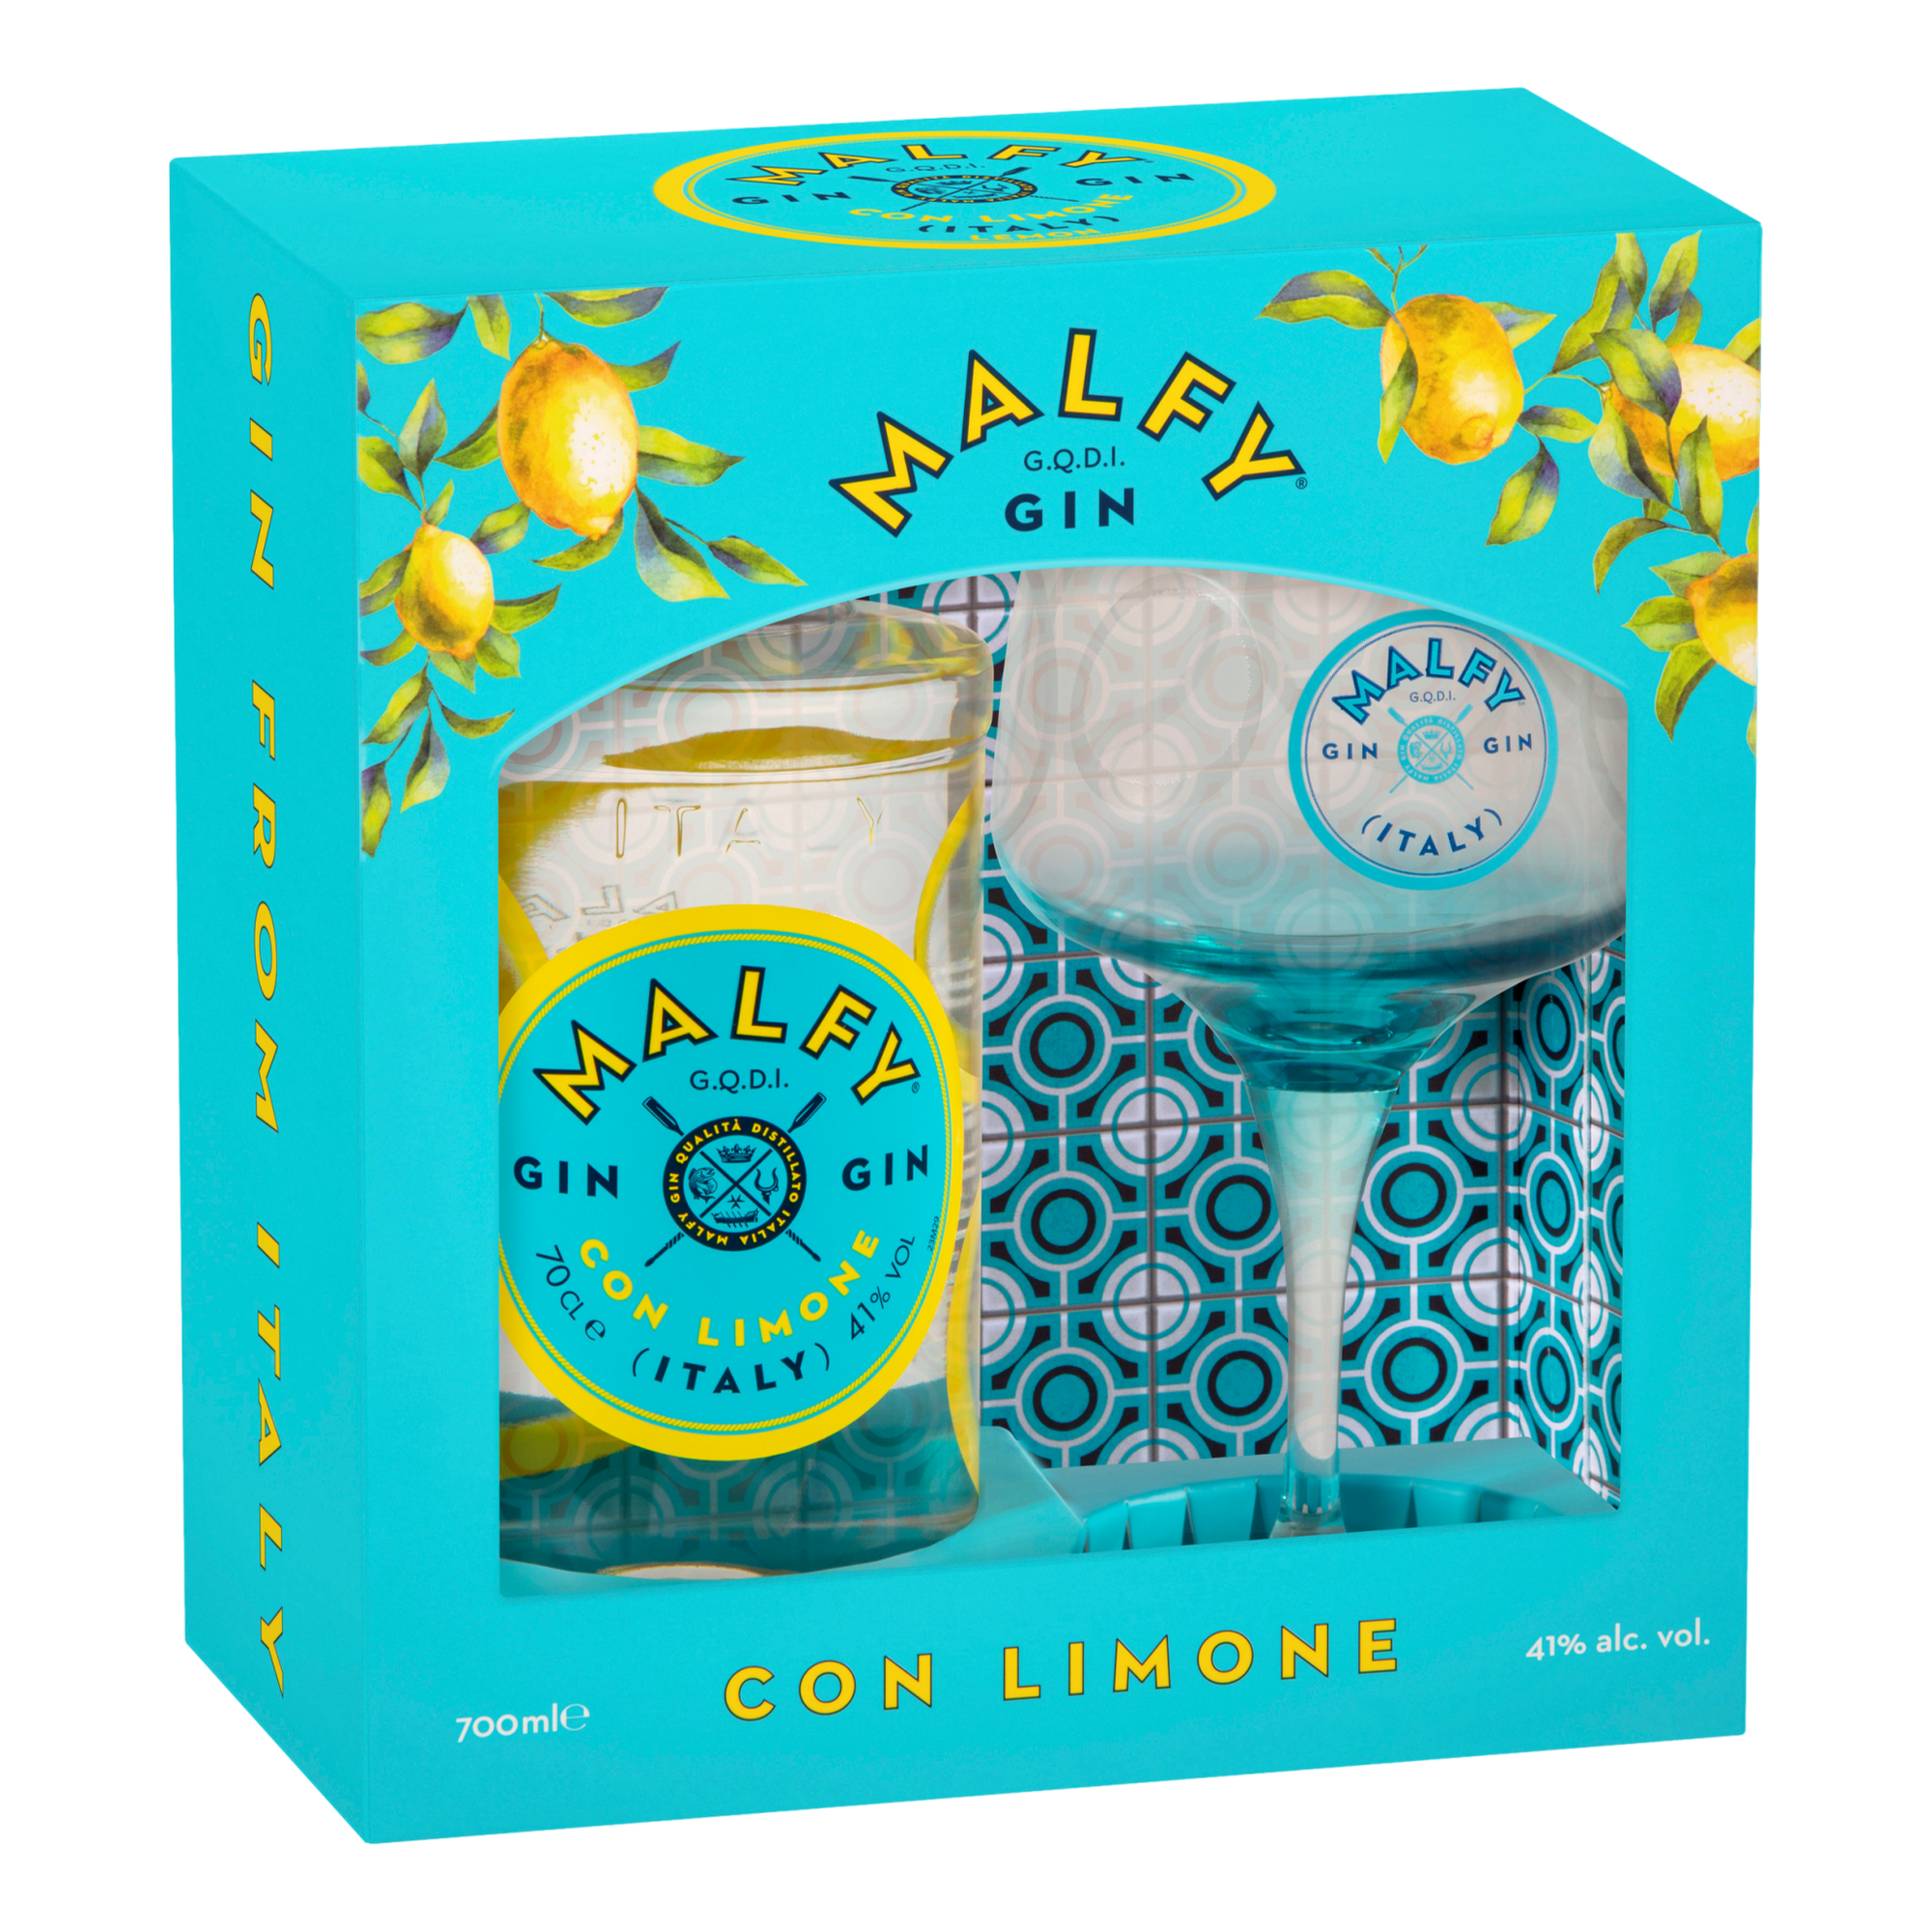 Malfy Con Limone Gin 700ml + Glass Gift Pack